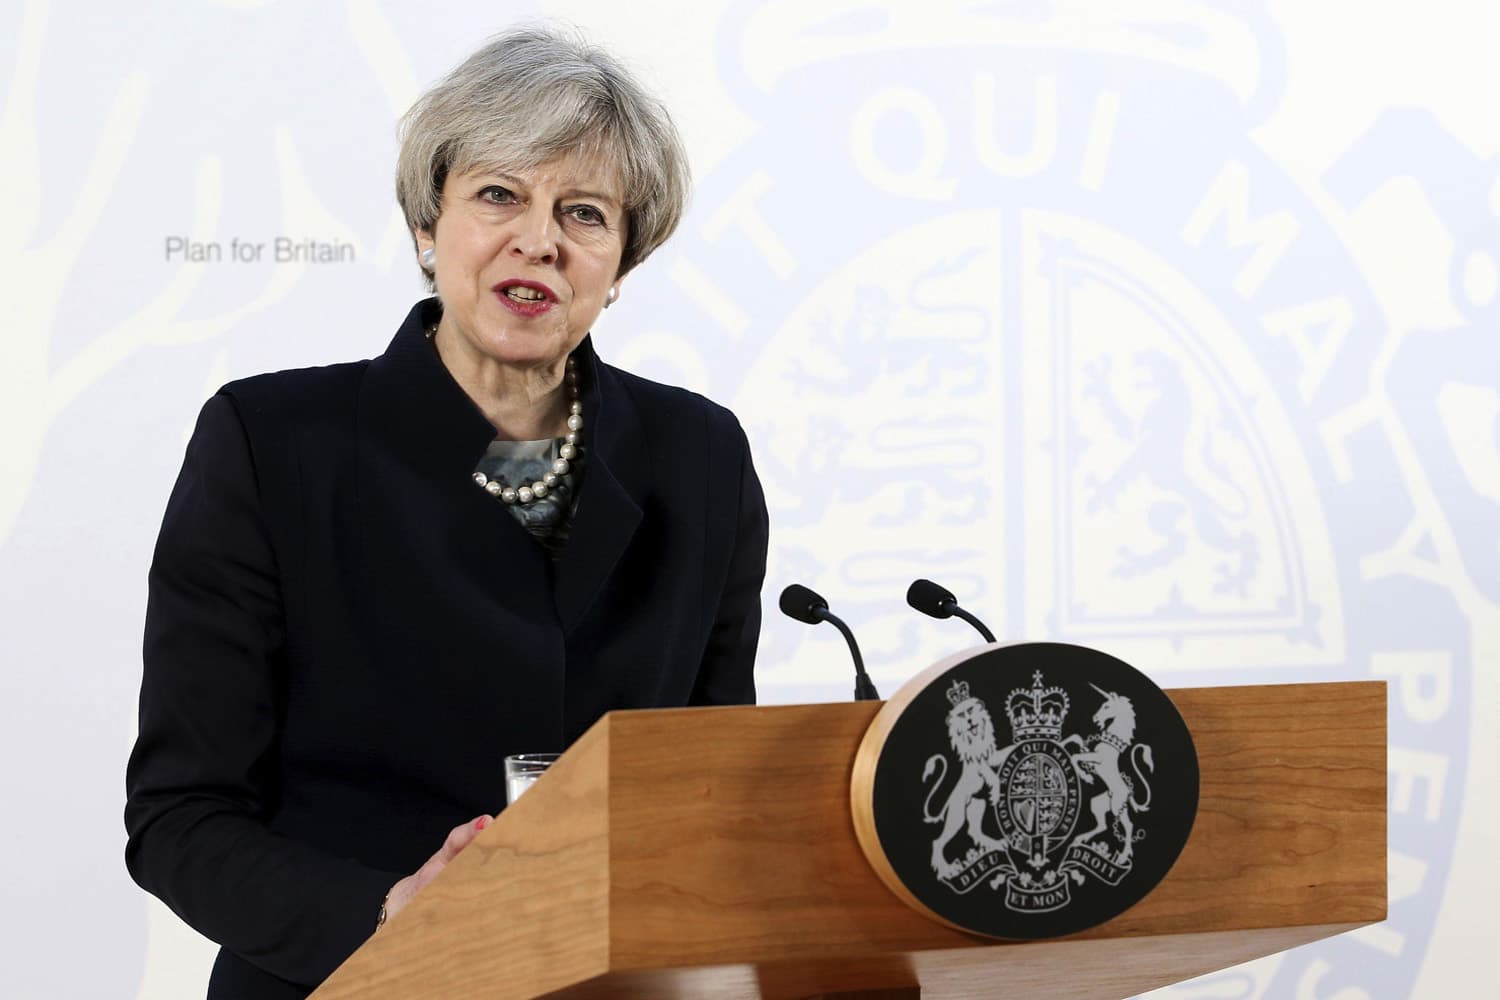 Britain's Prime Minister, Theresa May, gives a speech at the Department for International Development's office at Abercrombie House in East Kilbride Scotland. (Jane Barlow/AP)